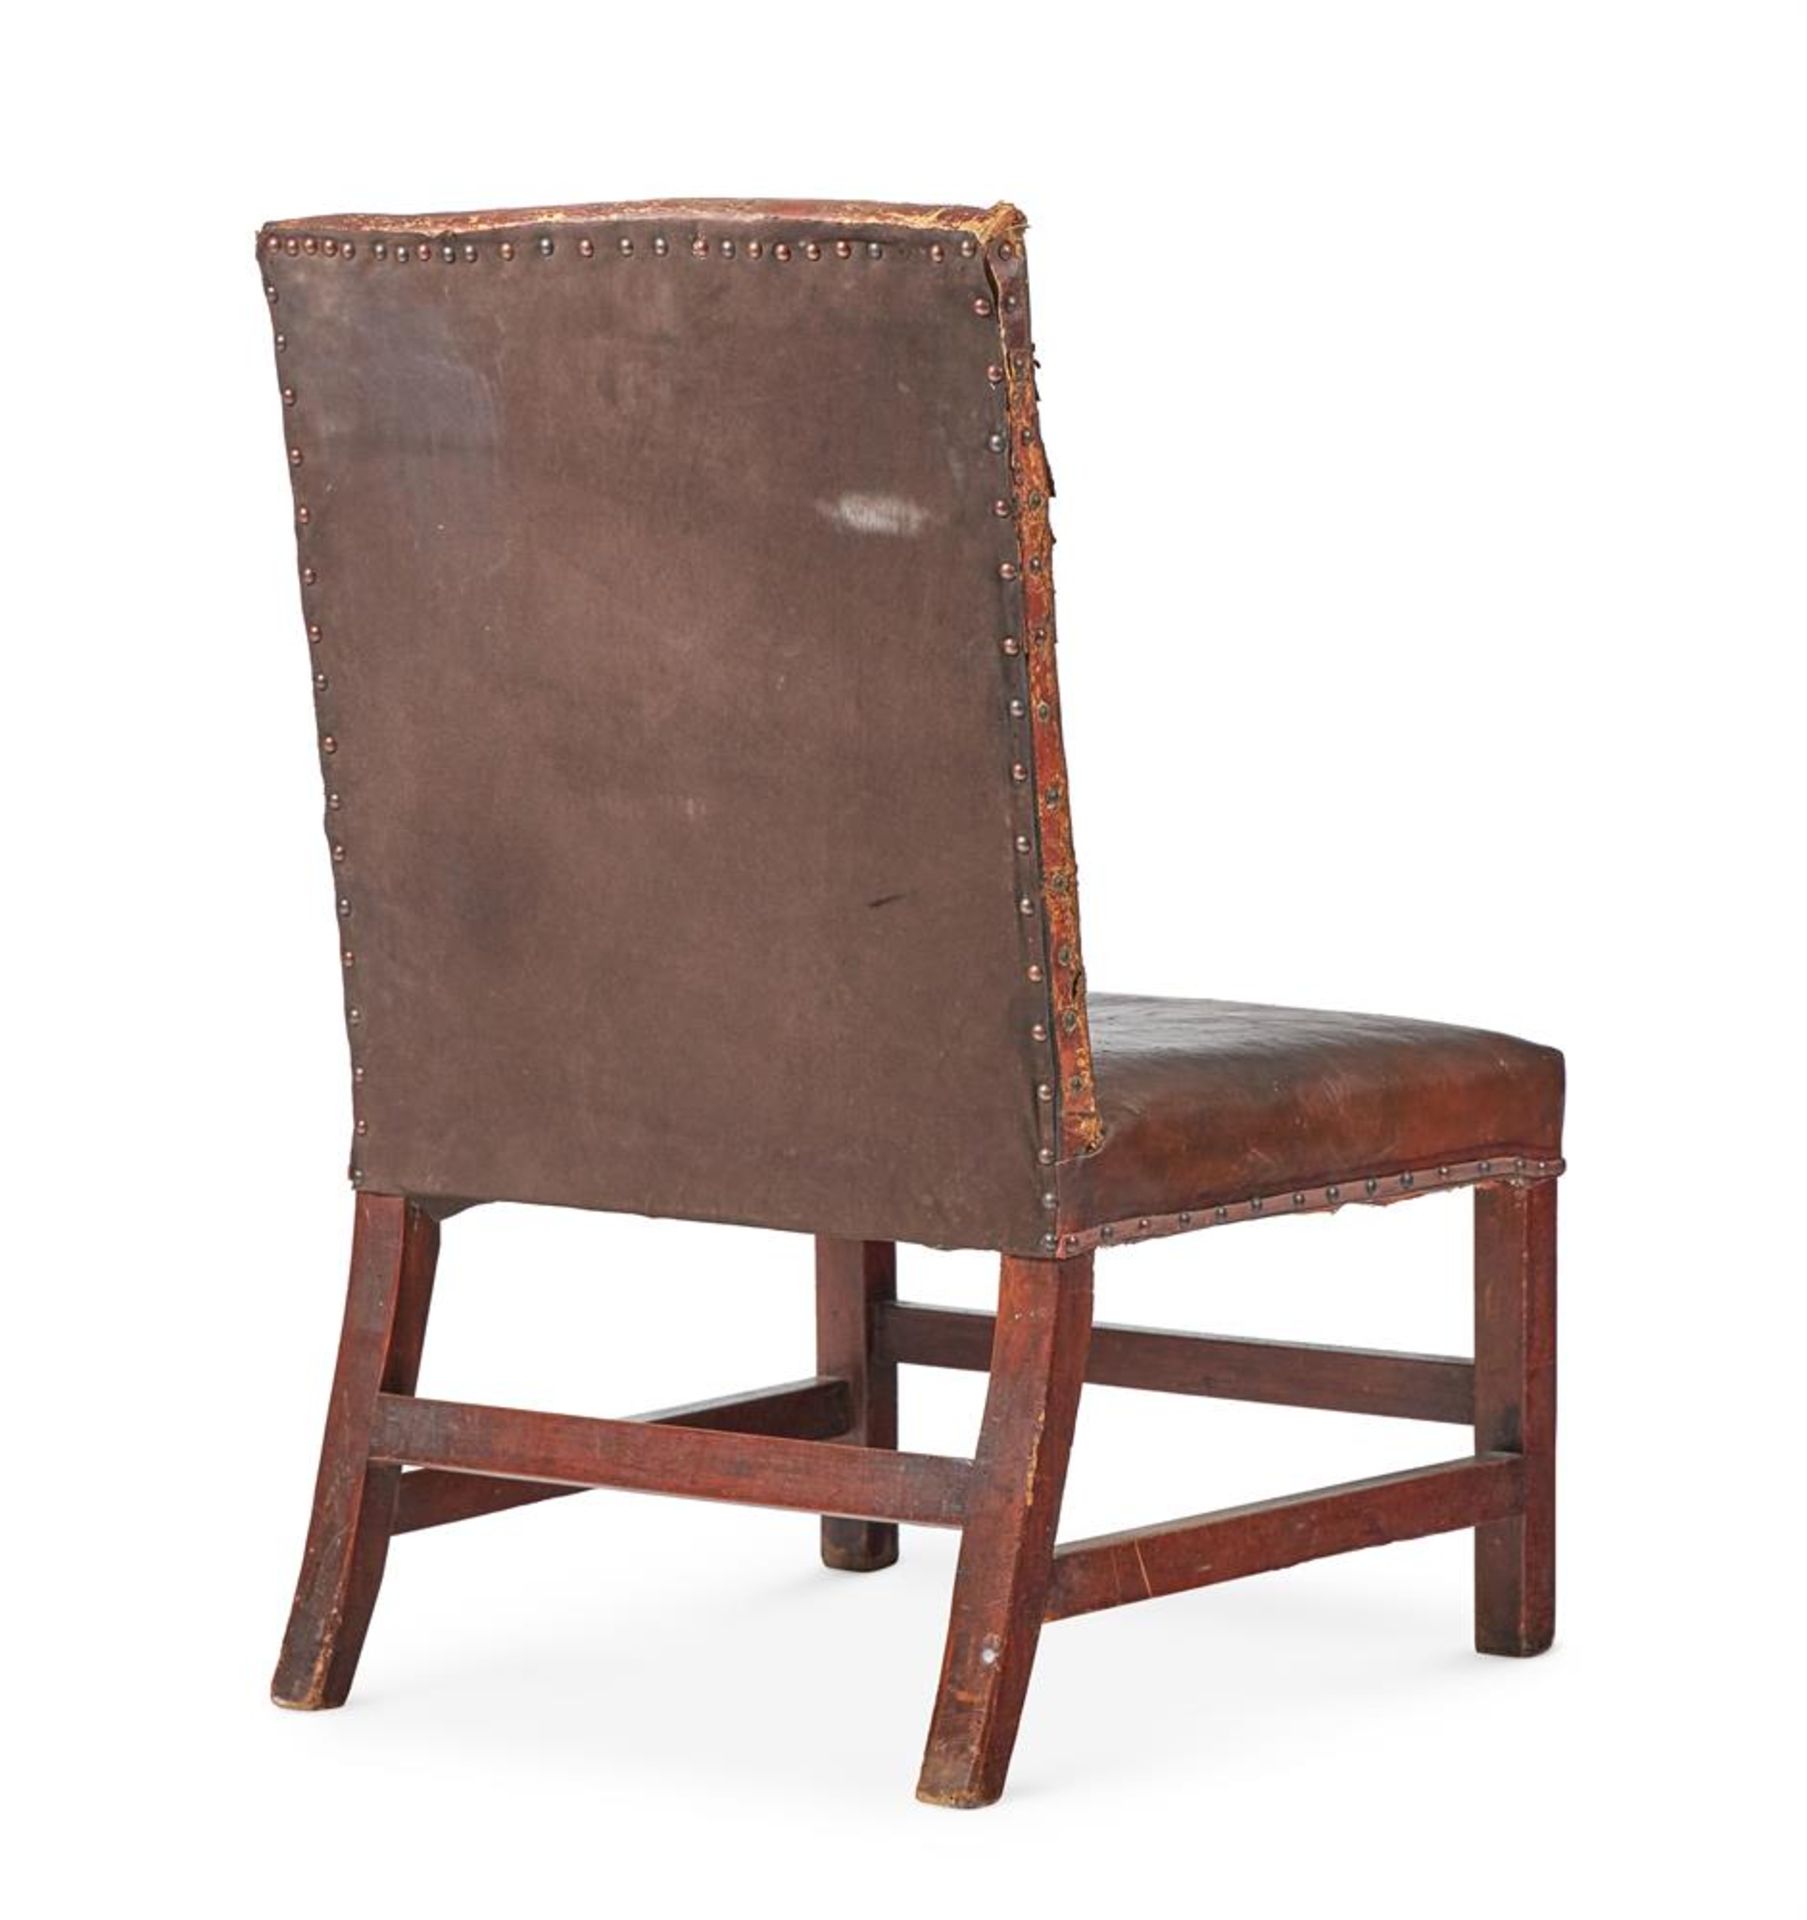 A GEORGE III MAHOGANY, BEECH AND LEATHER SIDE CHAIR, CIRCA 1760 - Image 2 of 2